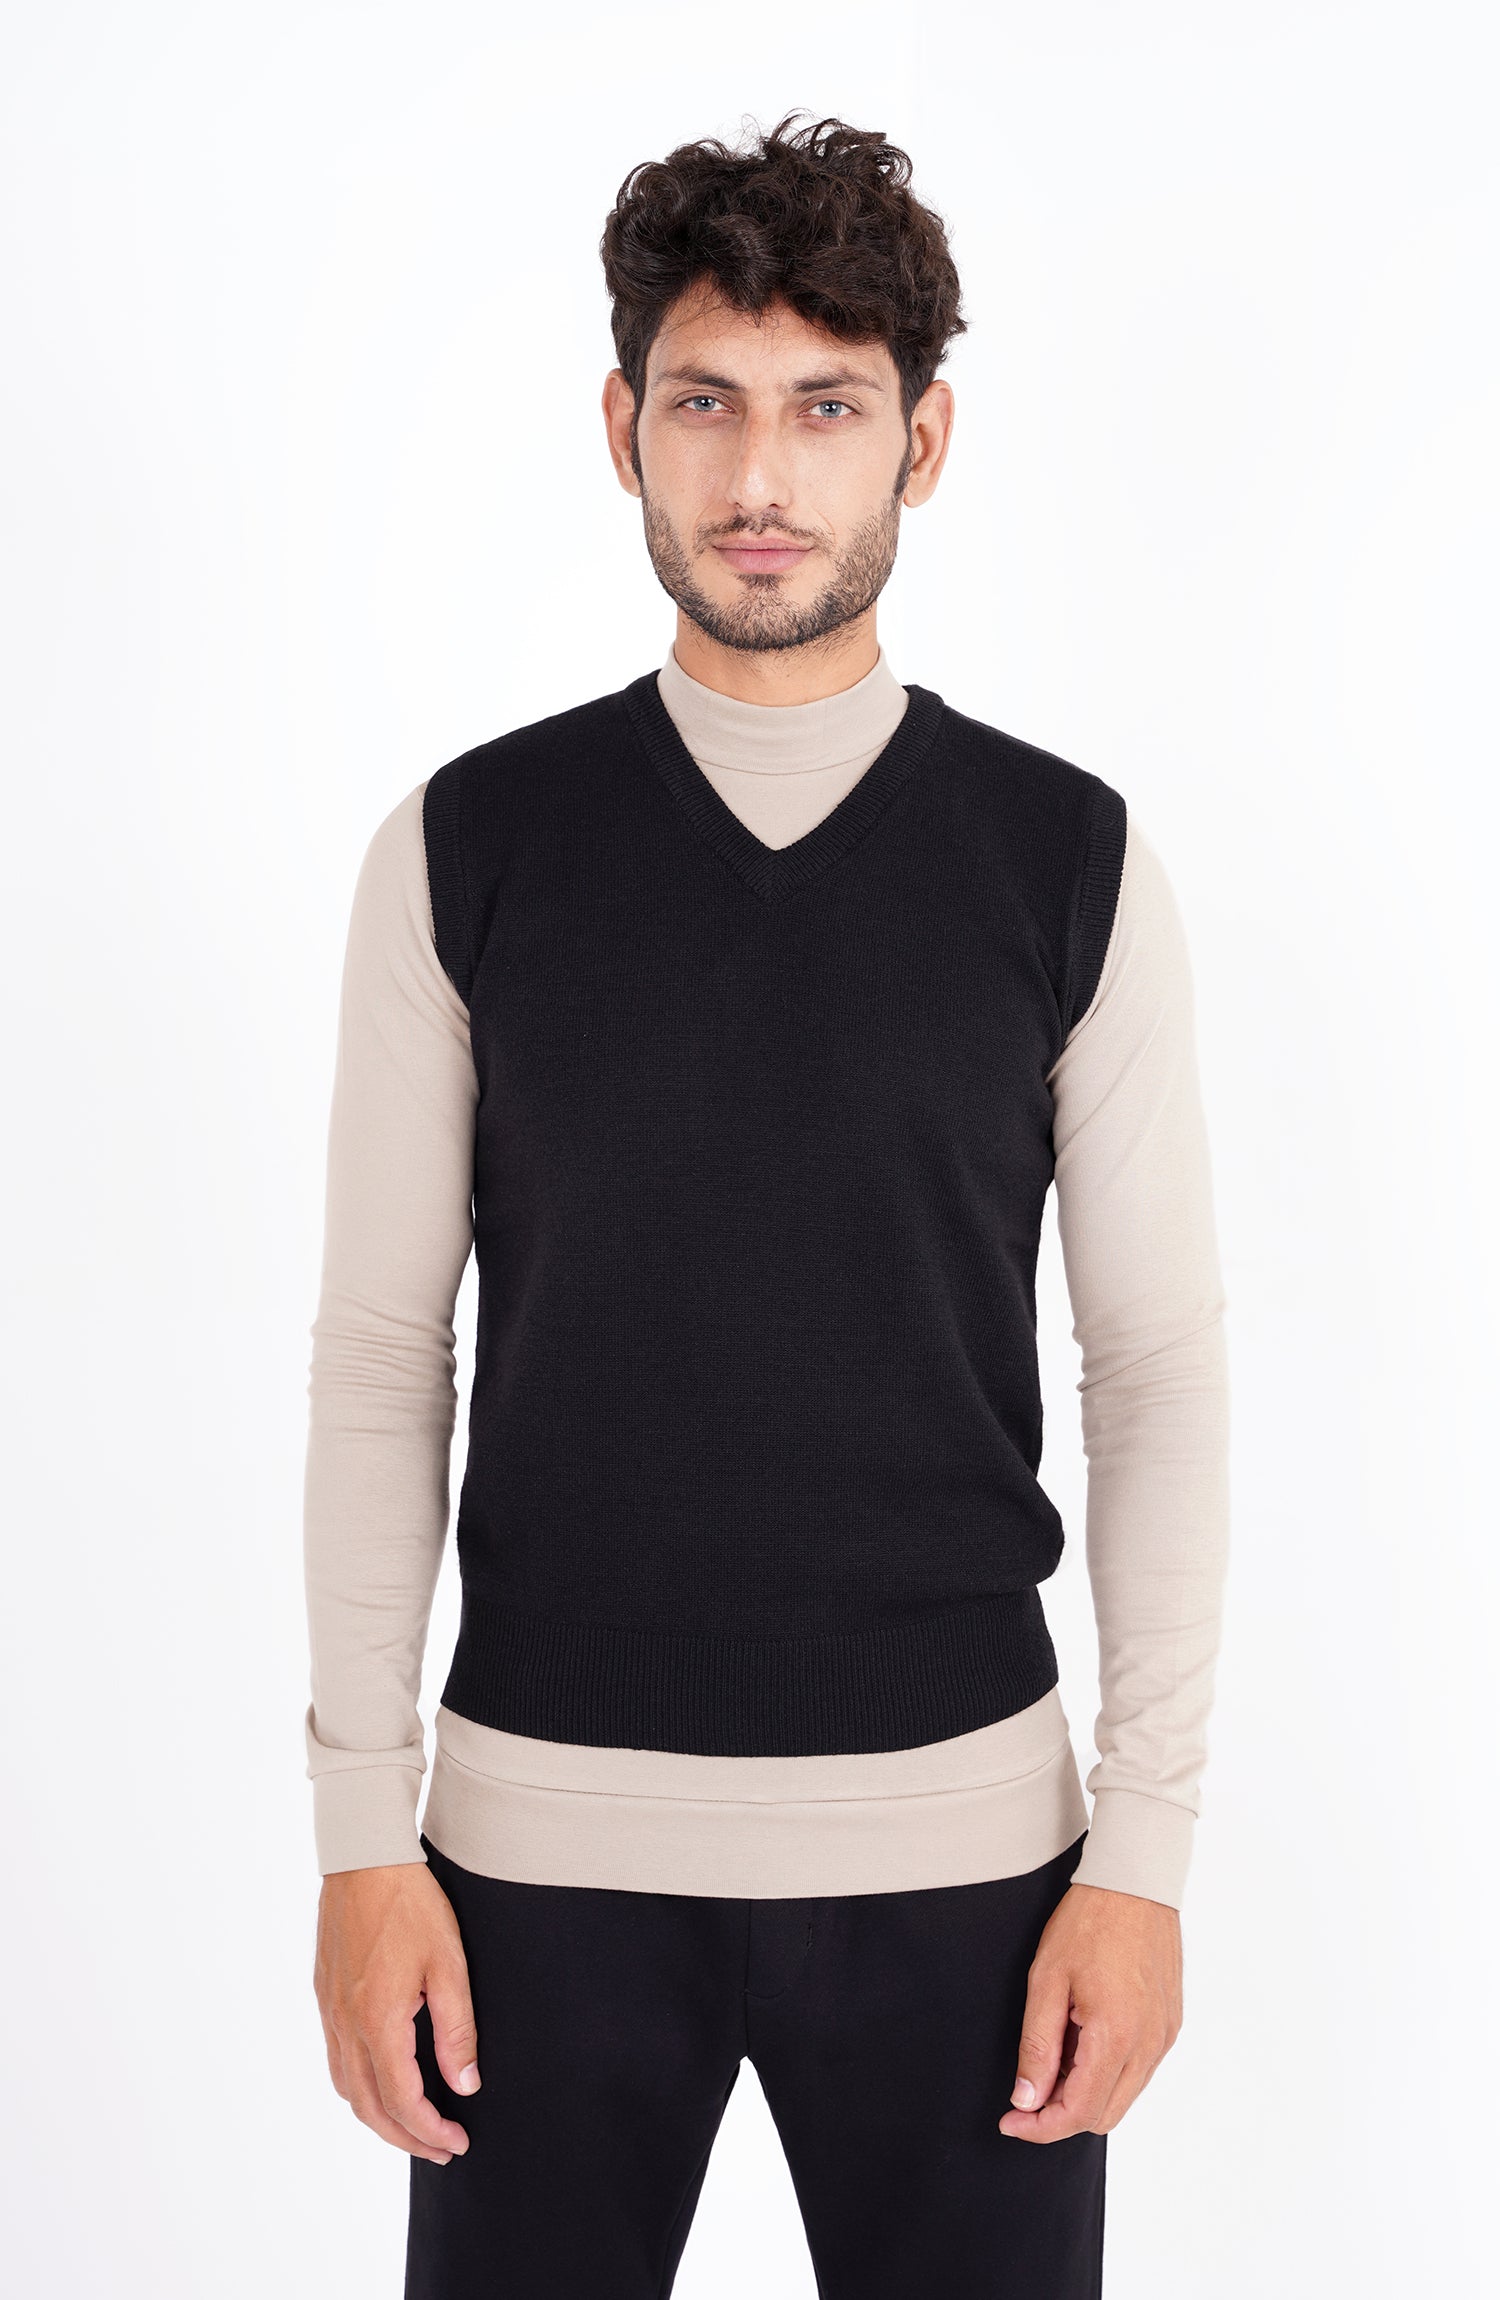 MS602A423-V NECK SLEEVELESS SWEATER-BLACK – Leisure Club Official